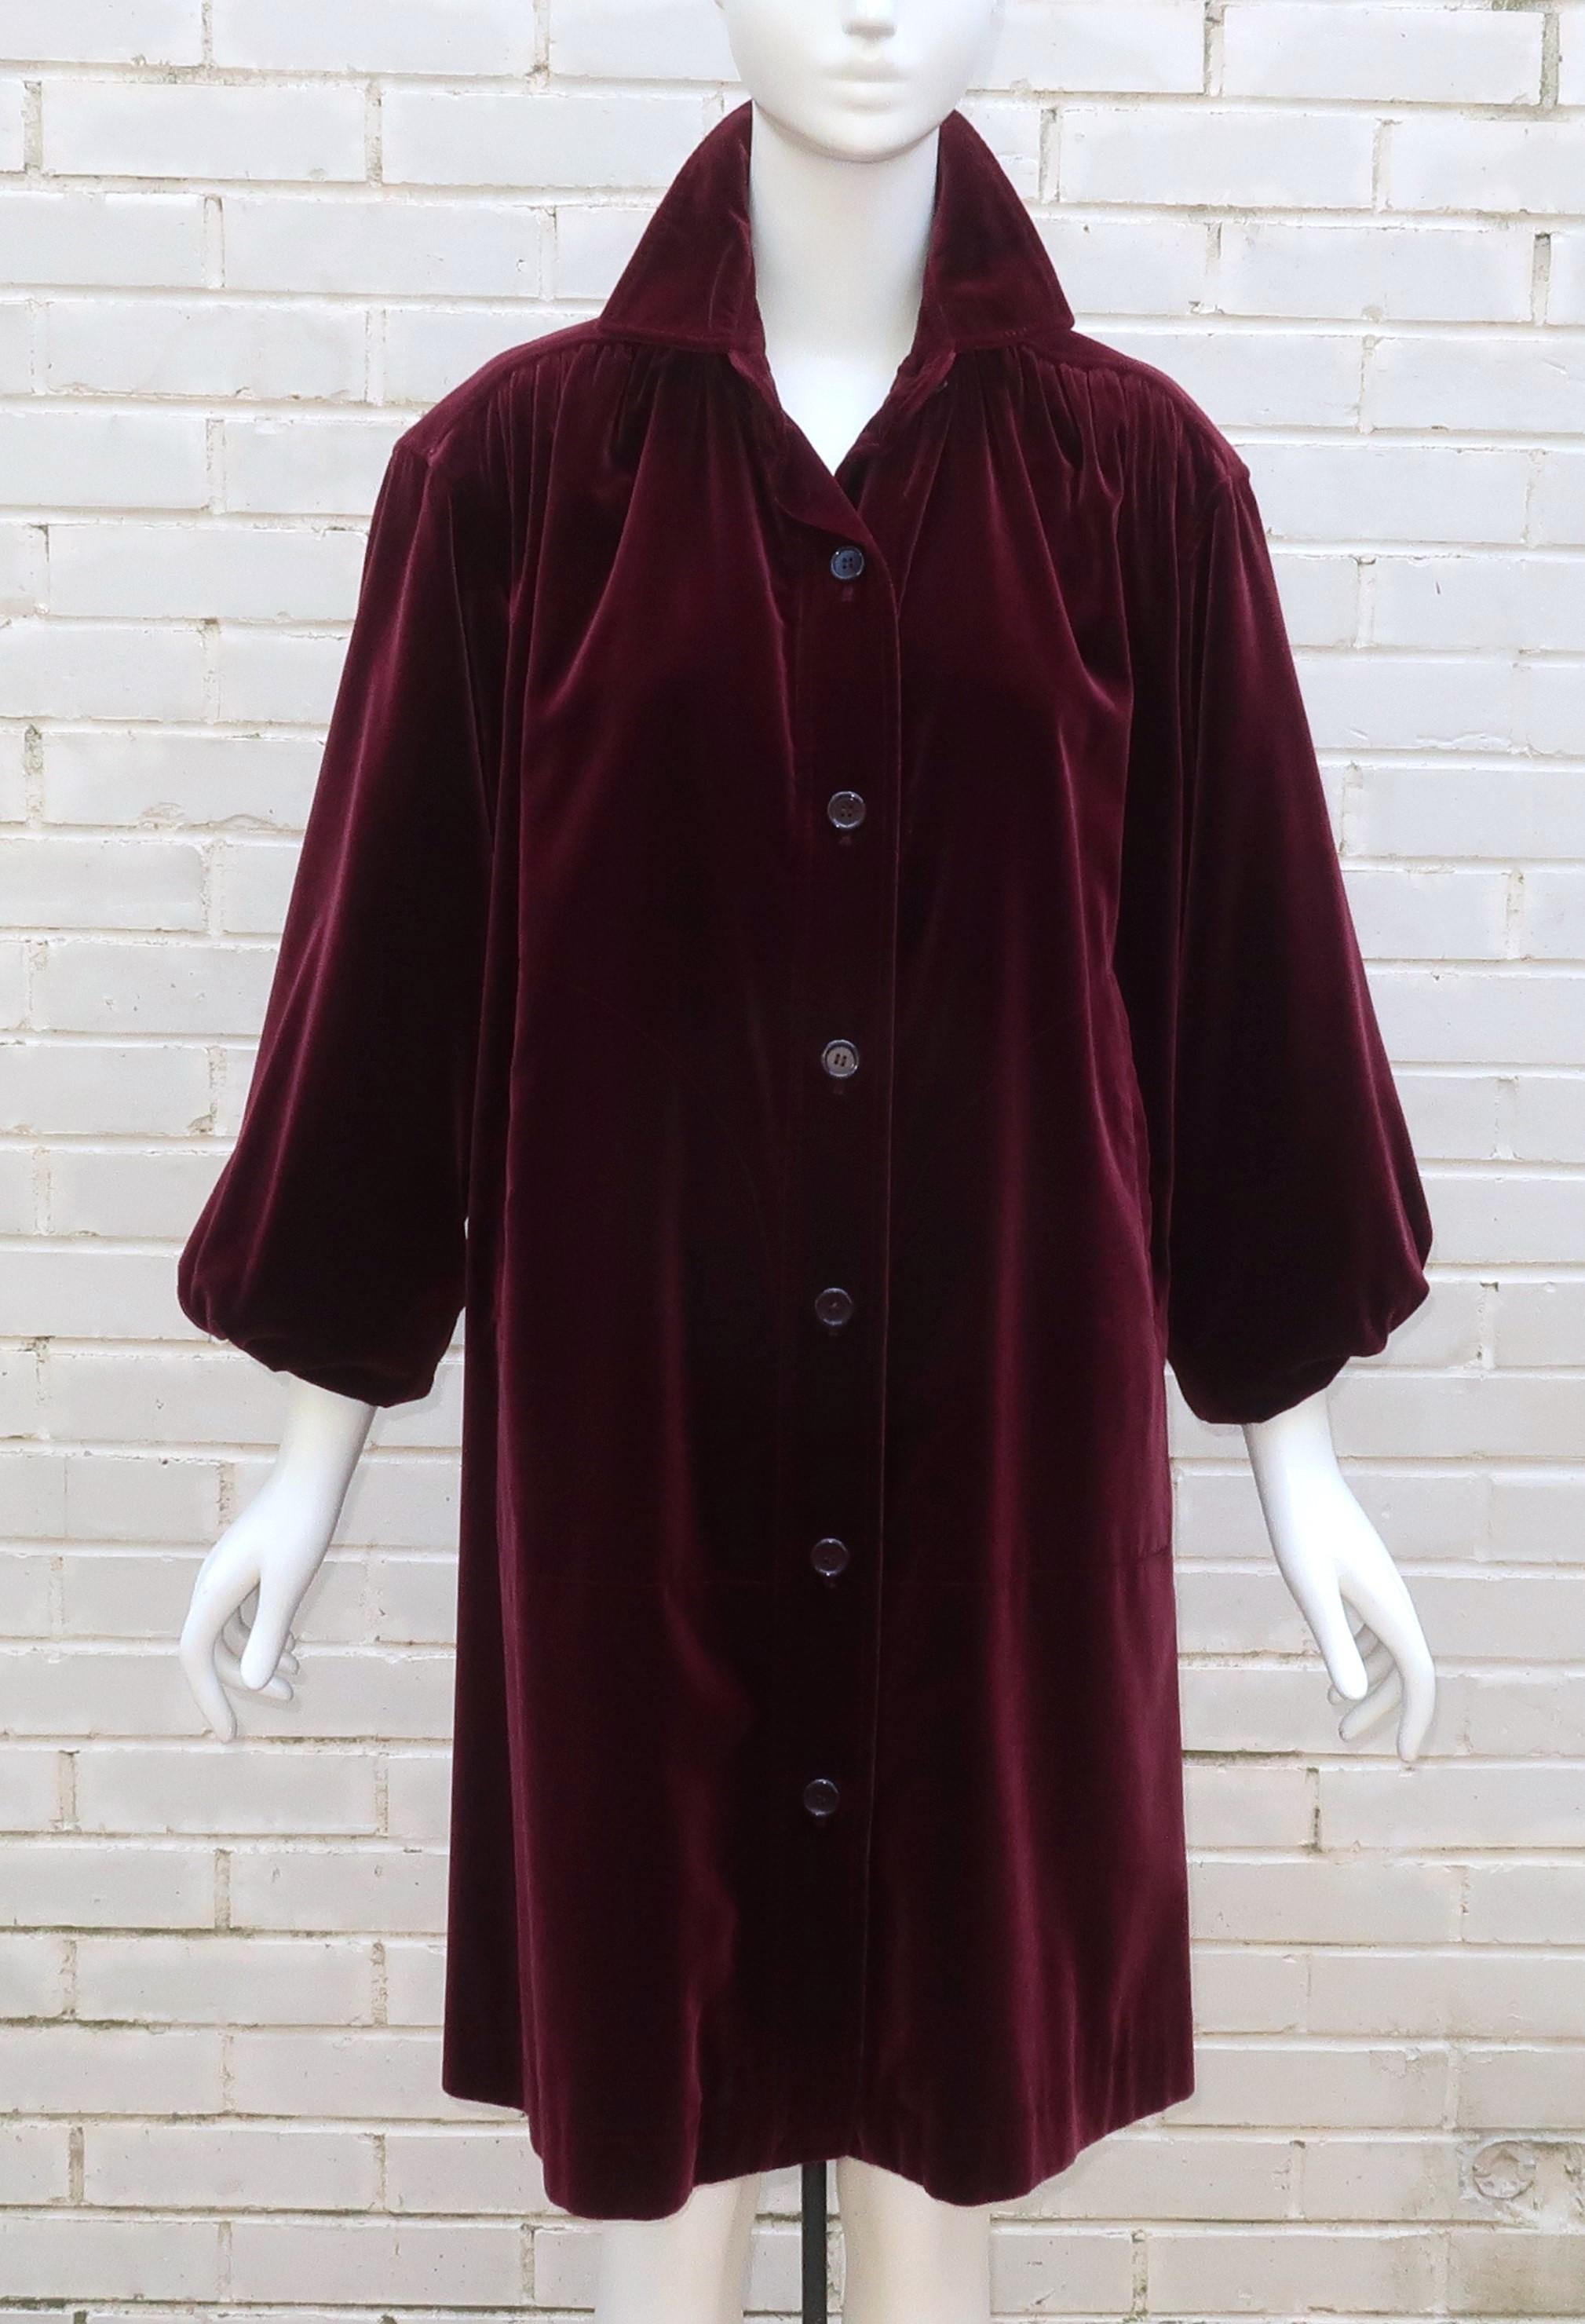 Lush & lovely!  Every sensory perception is stimulated by this gorgeous Yves Saint Laurent coat! The design starts with a rich ruby red heavy weight velvet fabric and moves on to a smock style construction with definition at the shoulders and folds